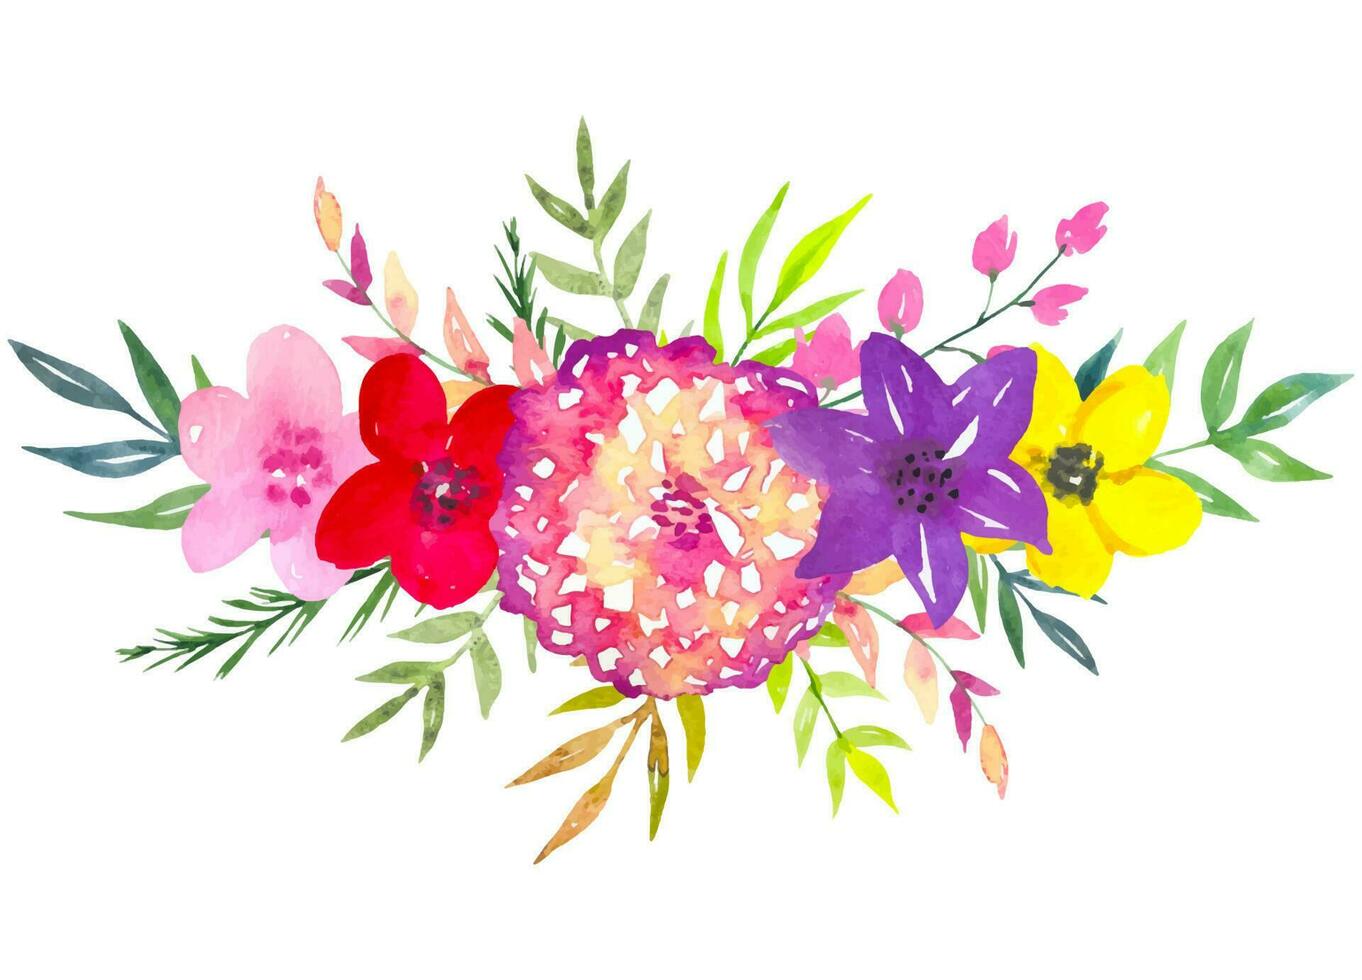 Floral watercolor composition of bright flowers. vector